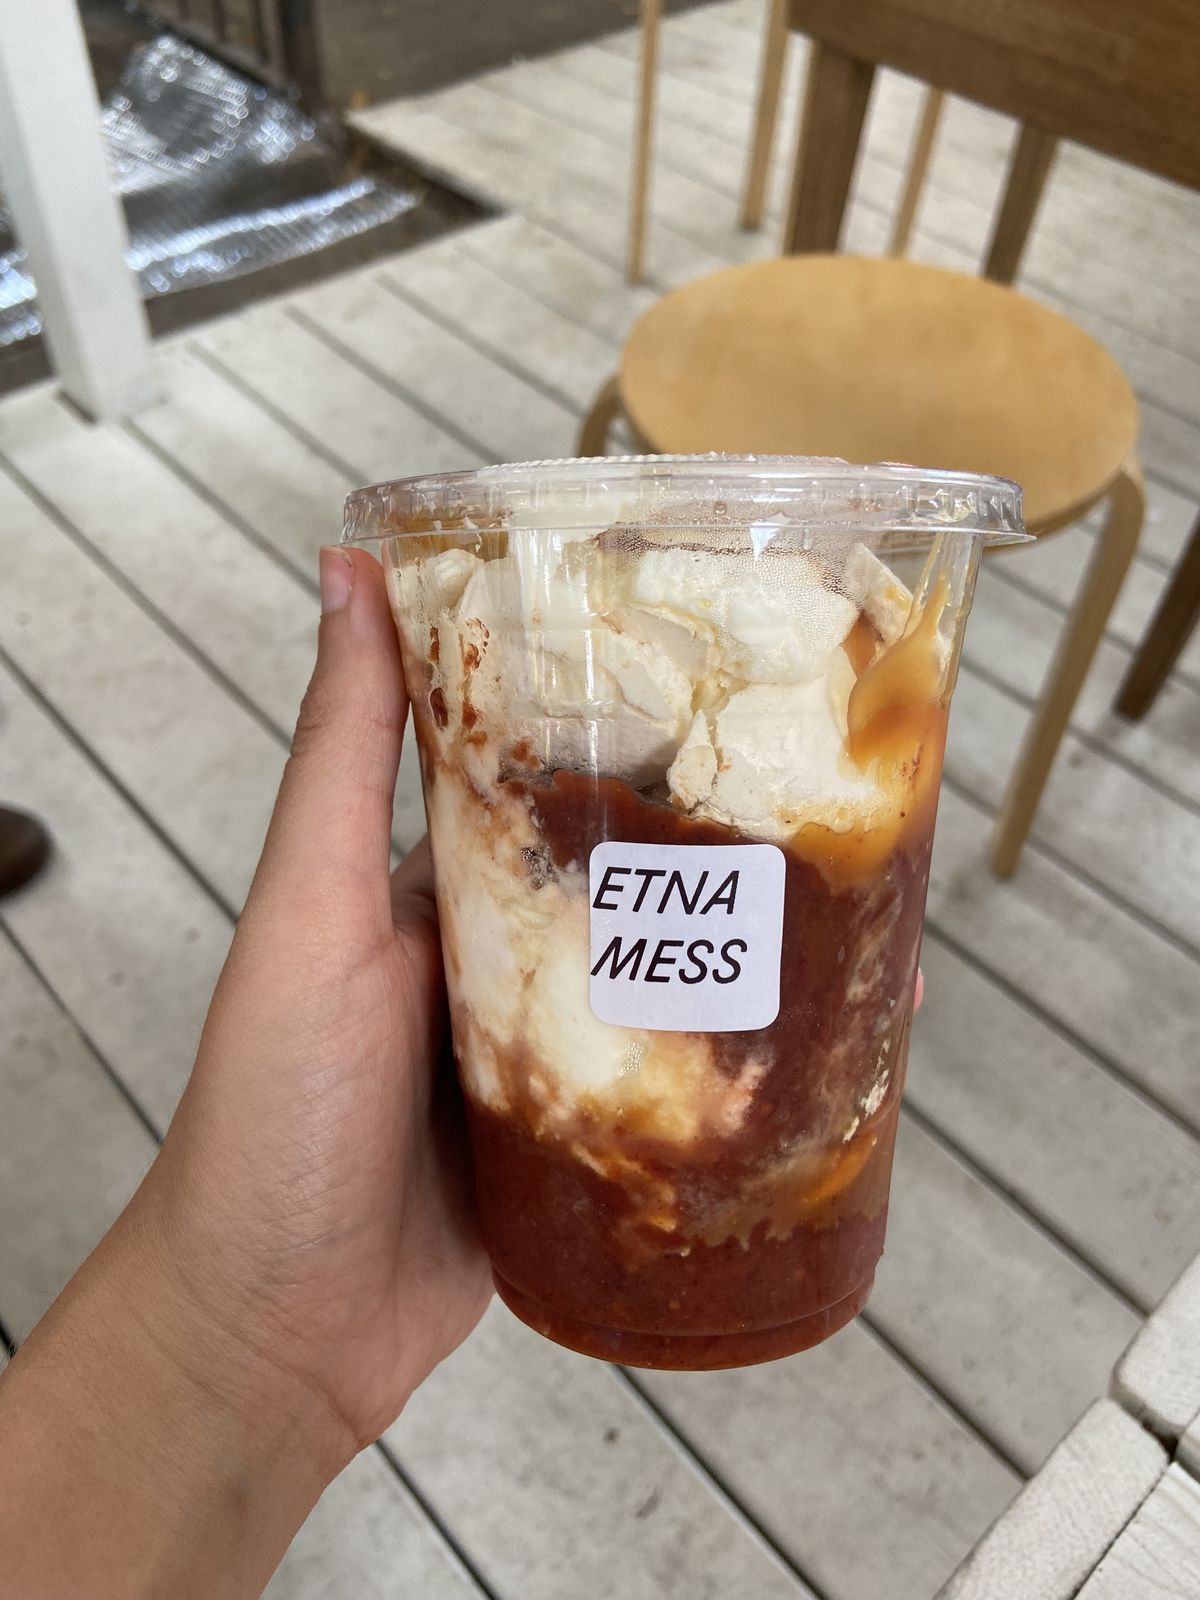 Hand holding a plastic cup labeled Etna Mess filled with tomatoes, strawberries, meringues and caramel.